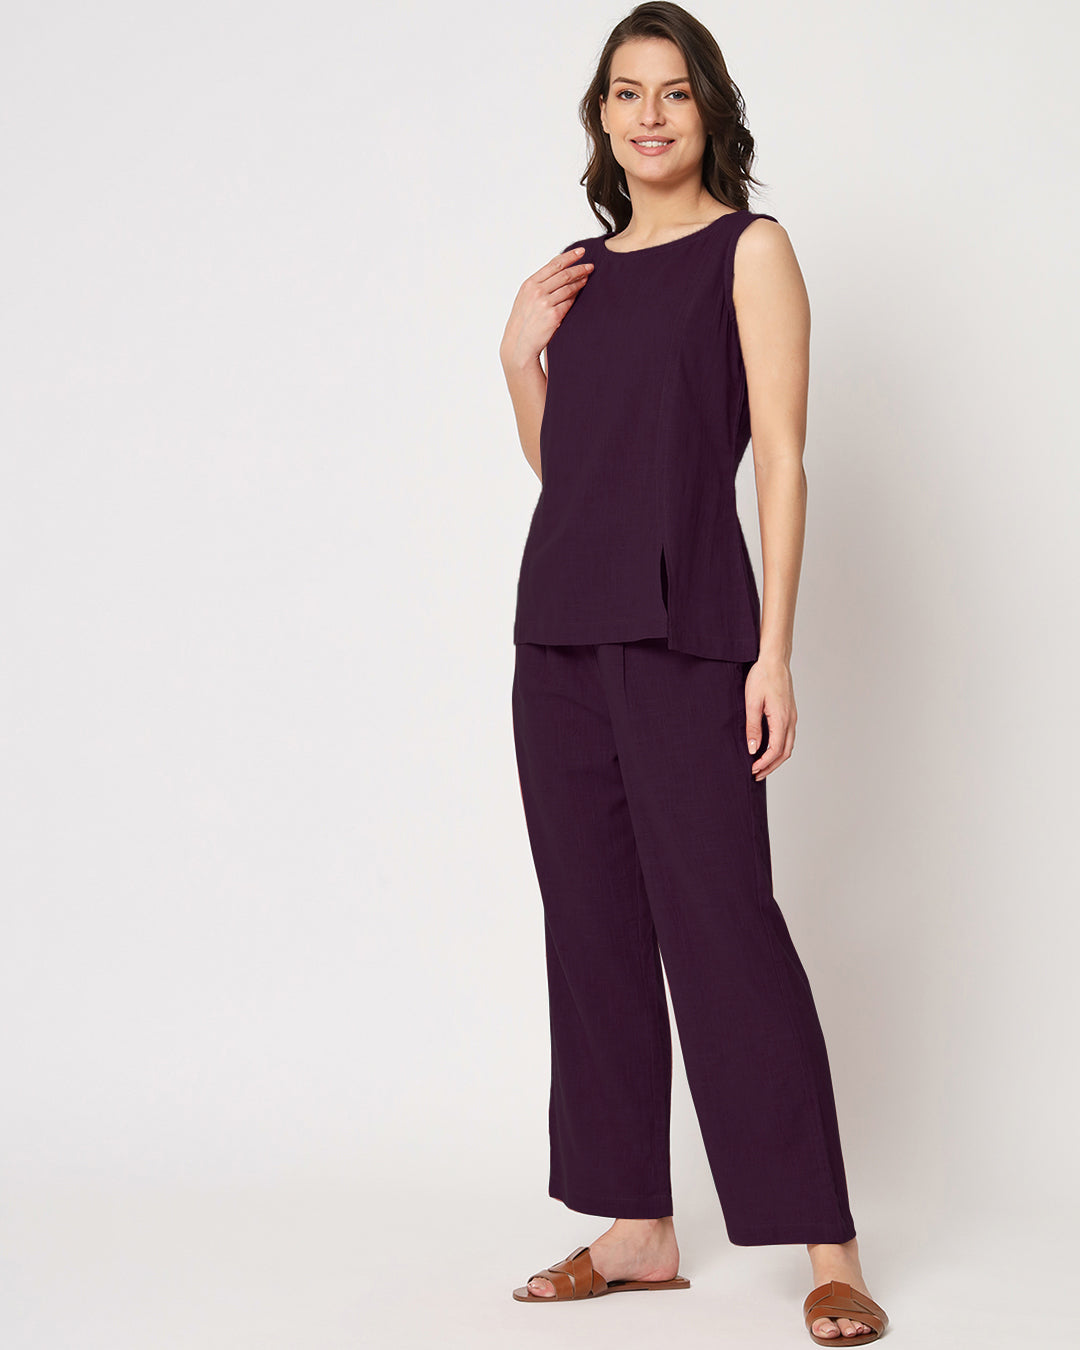 Plum Passion Sleeveless Short Length Solid Top (Without Bottoms)